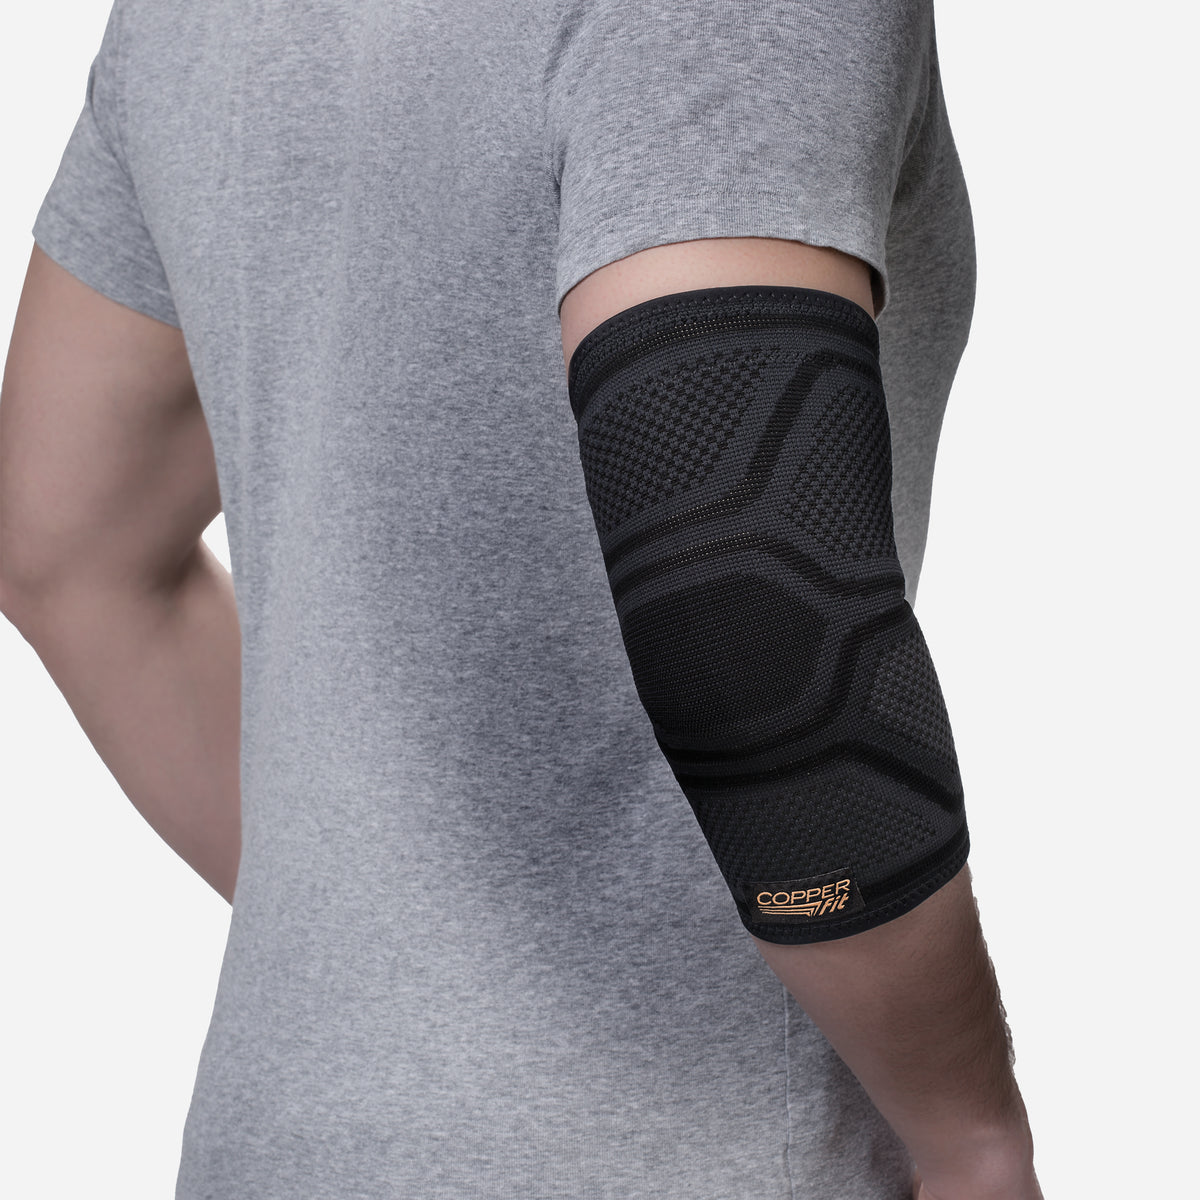  Copper Compression Arm Sleeve - Copper Infused Full